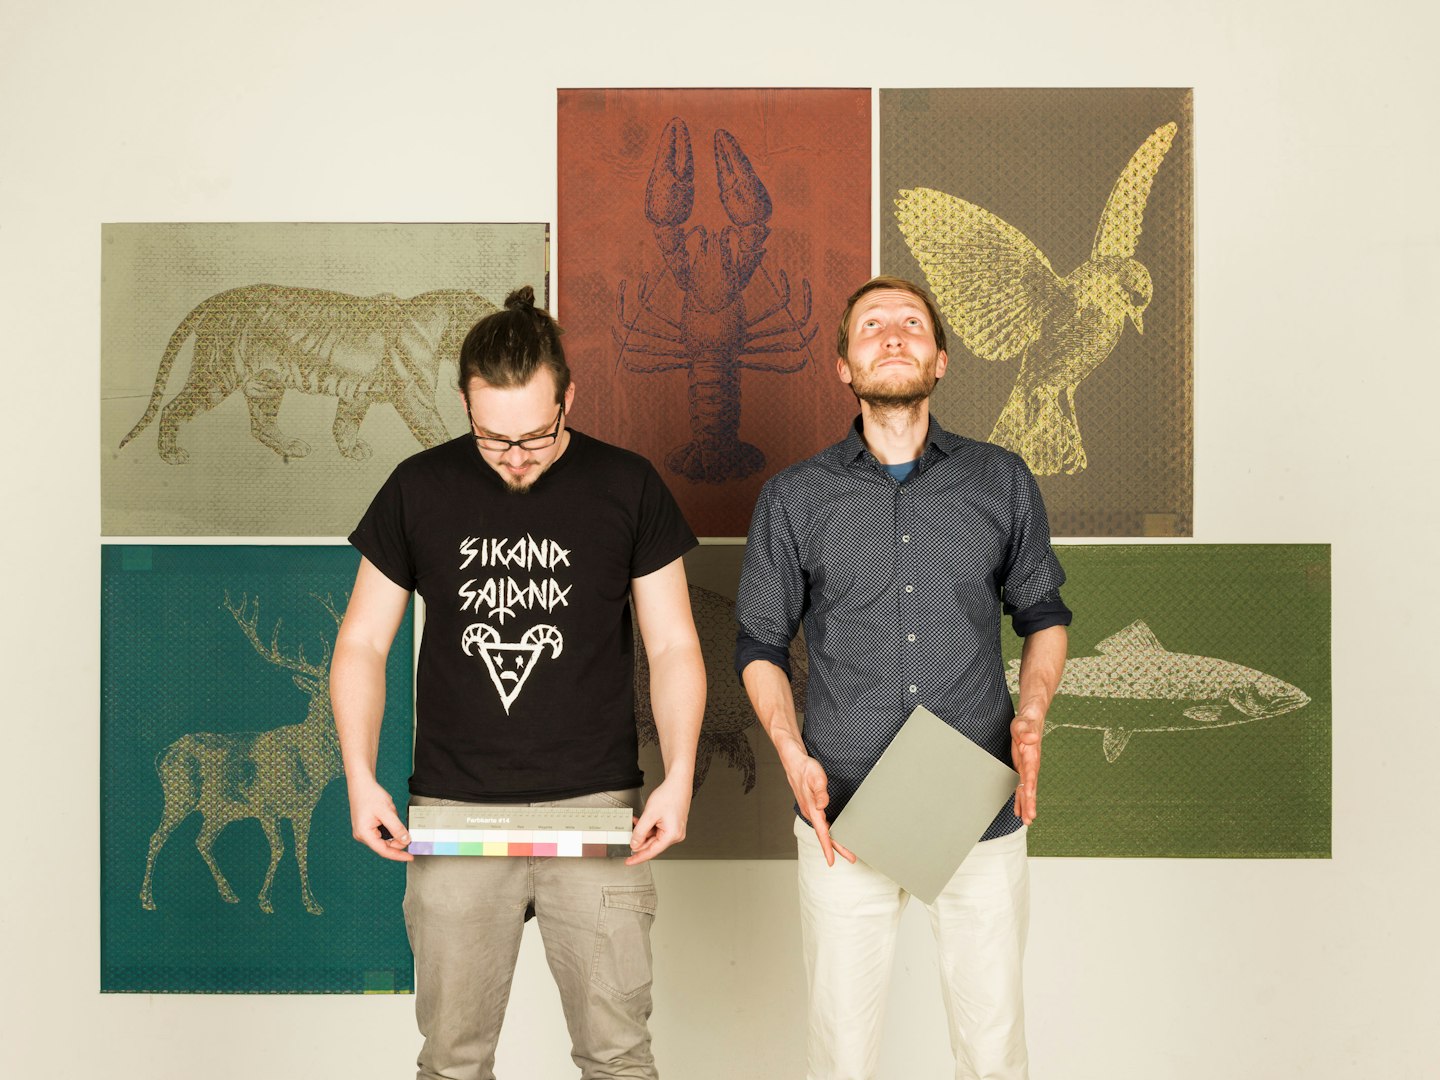 Jan and Ondrej with their ‘Olegu’ silk screen graphics. Courtesy of the artists.